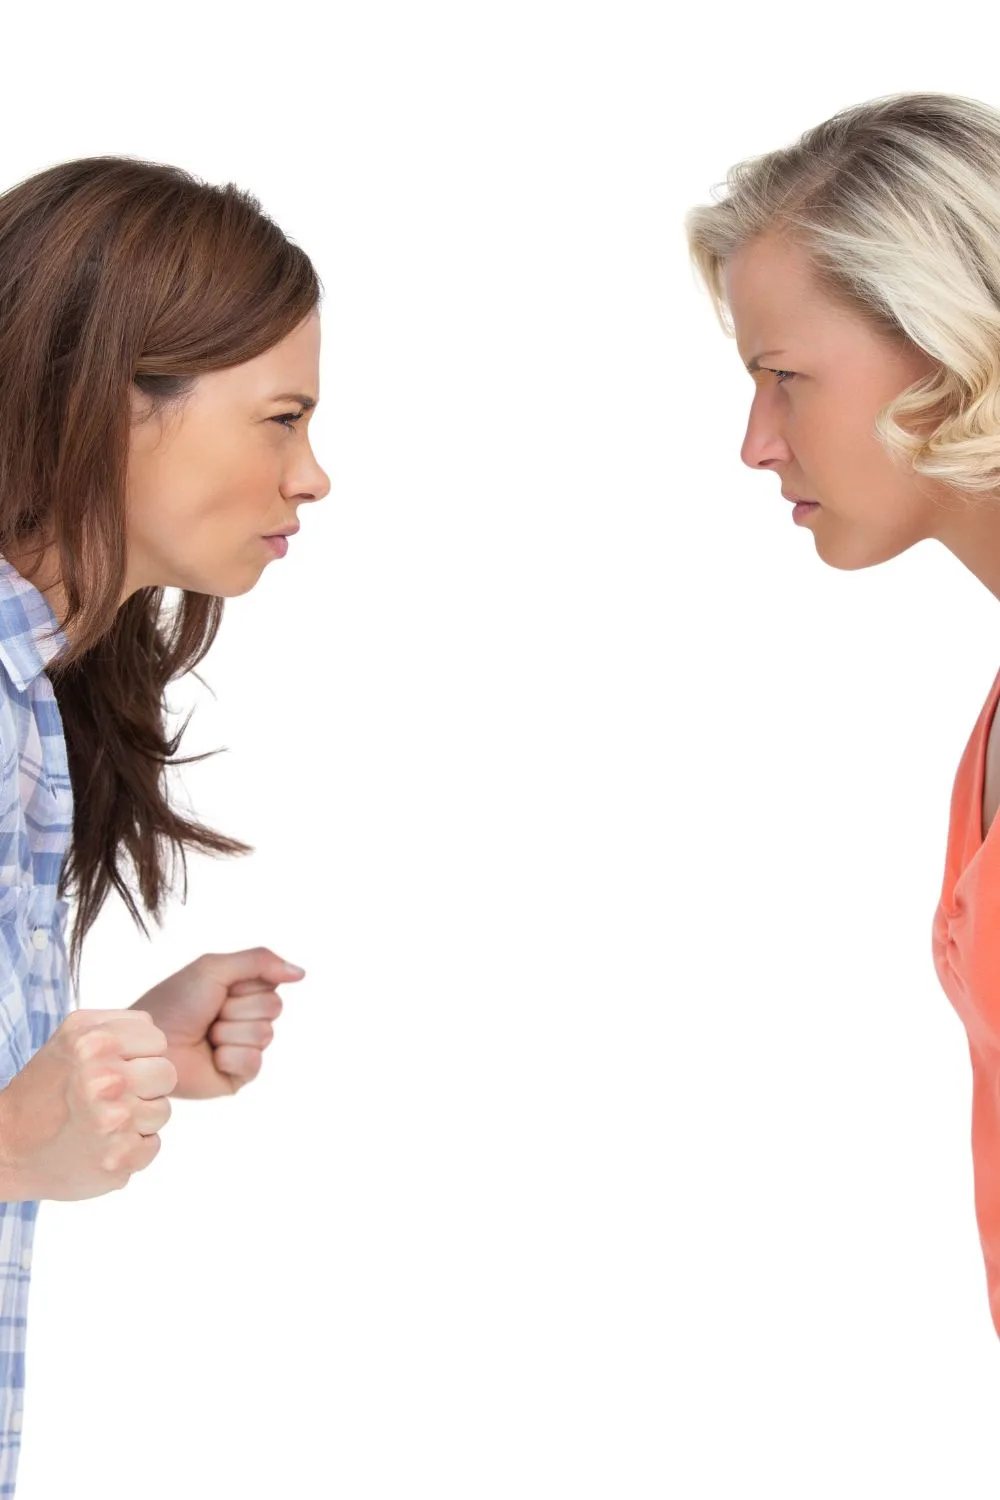 Mean Things To Say To The Other Woman